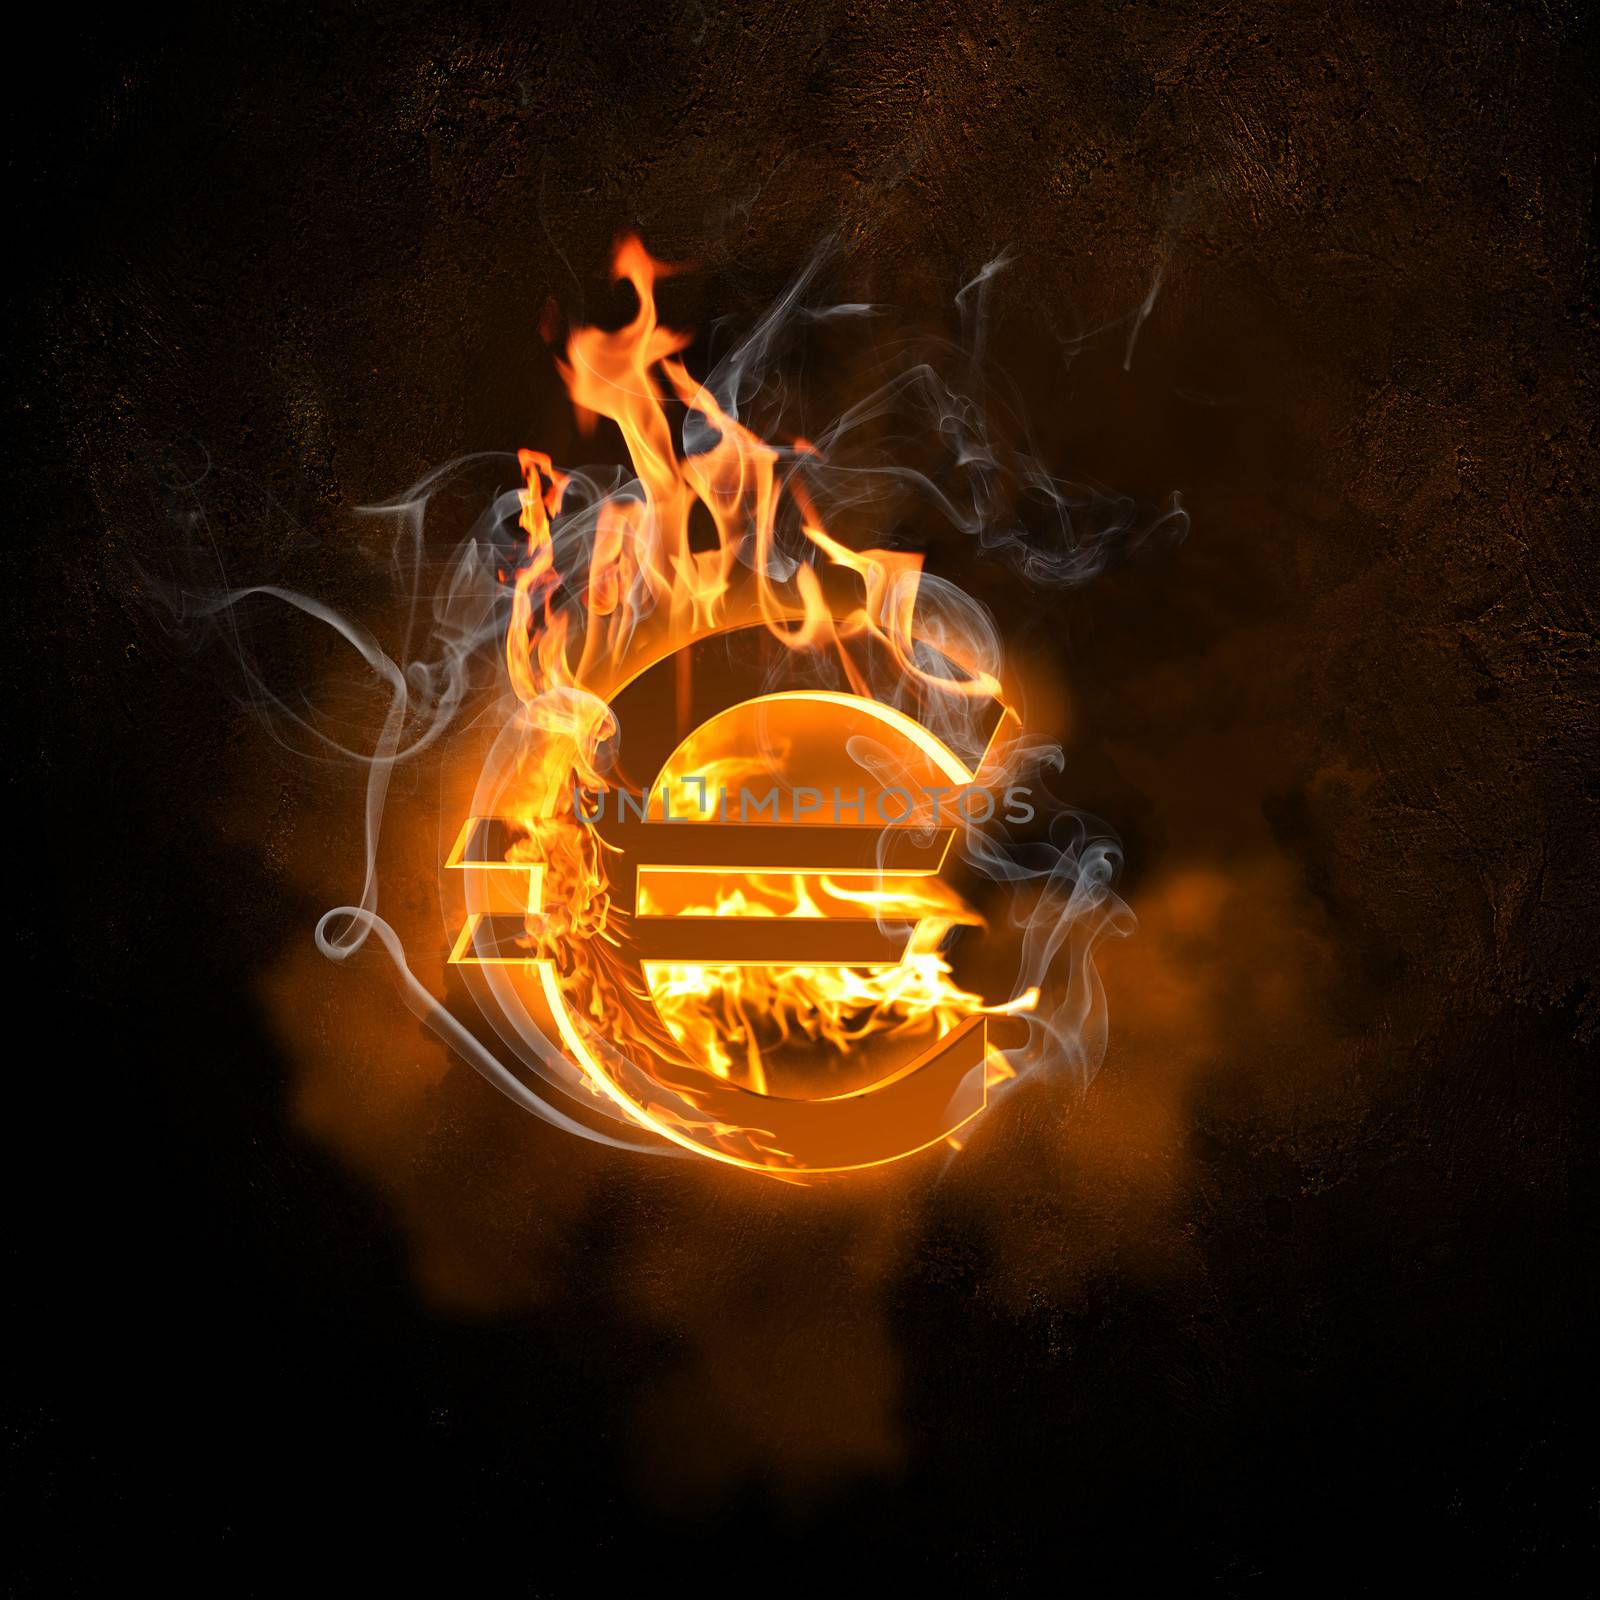 Euro symbol in fire flames by sergey_nivens